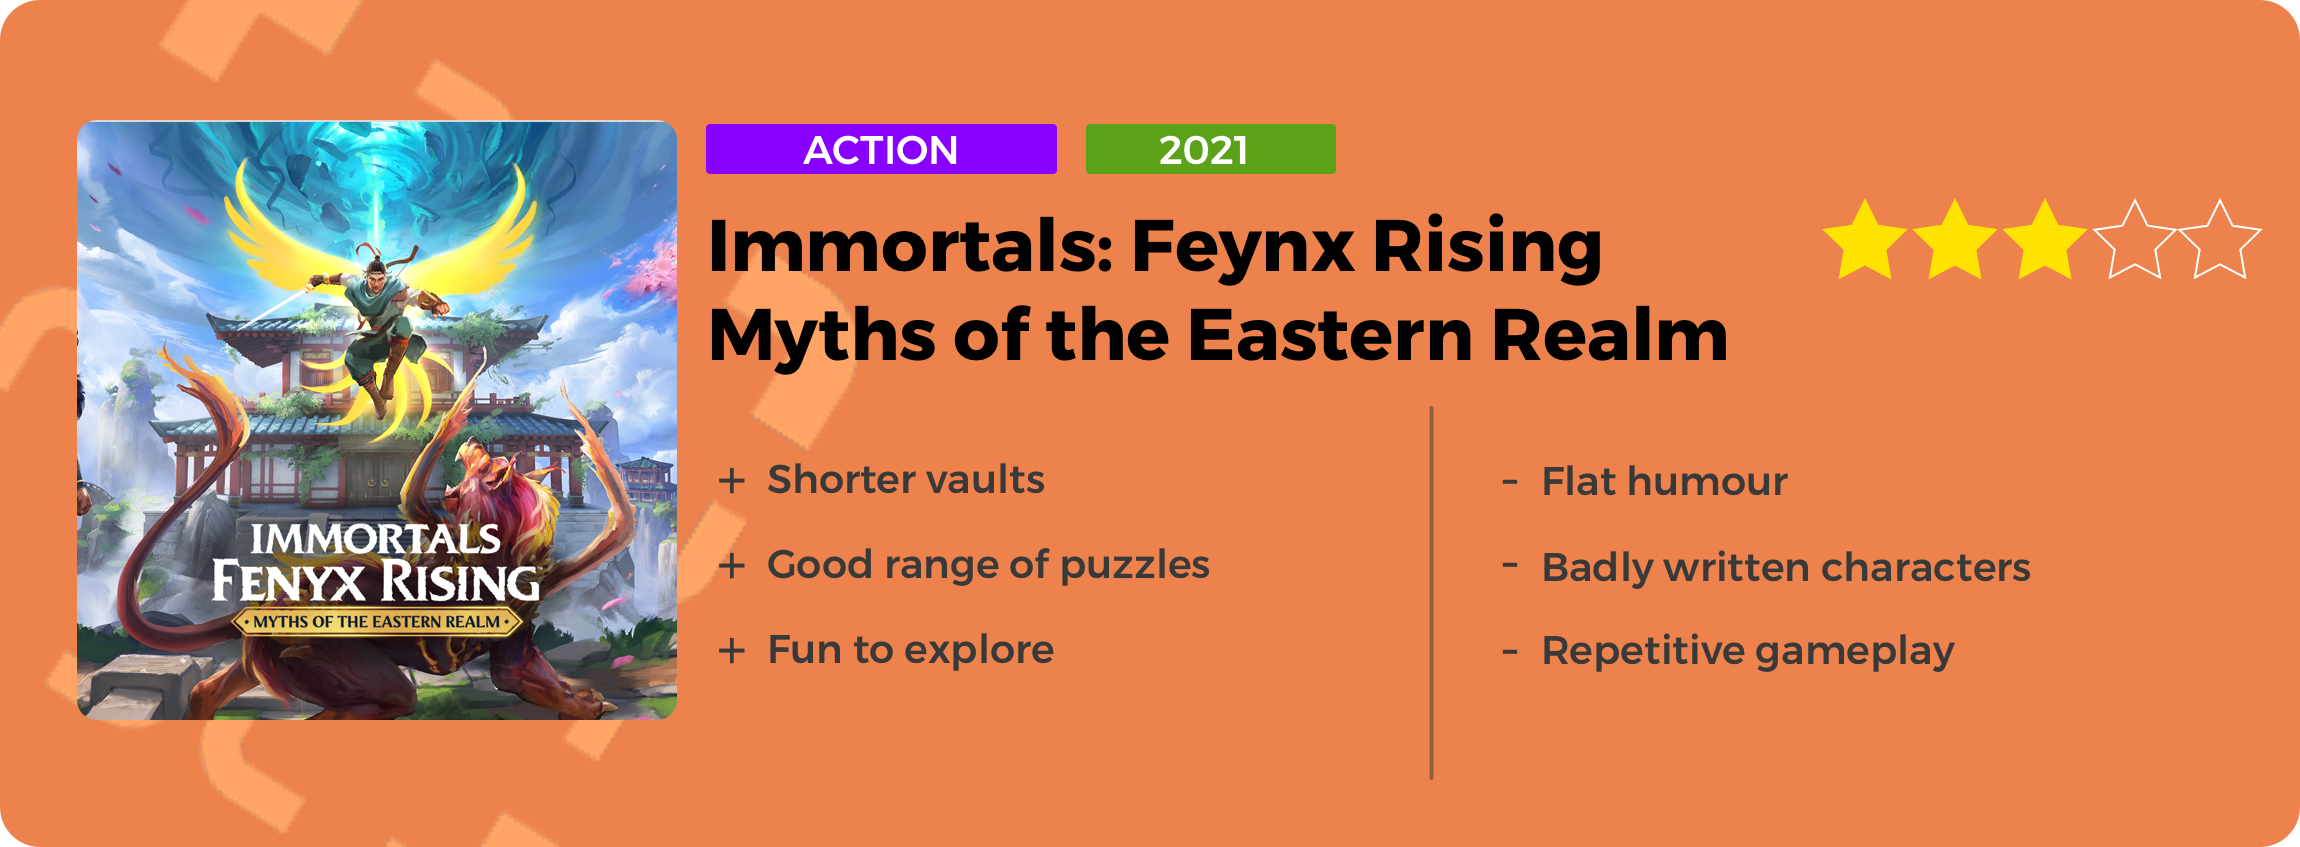 Immortals Fenyx Rising, Myths of the Eastern Realm - Review card score 3 out of 5